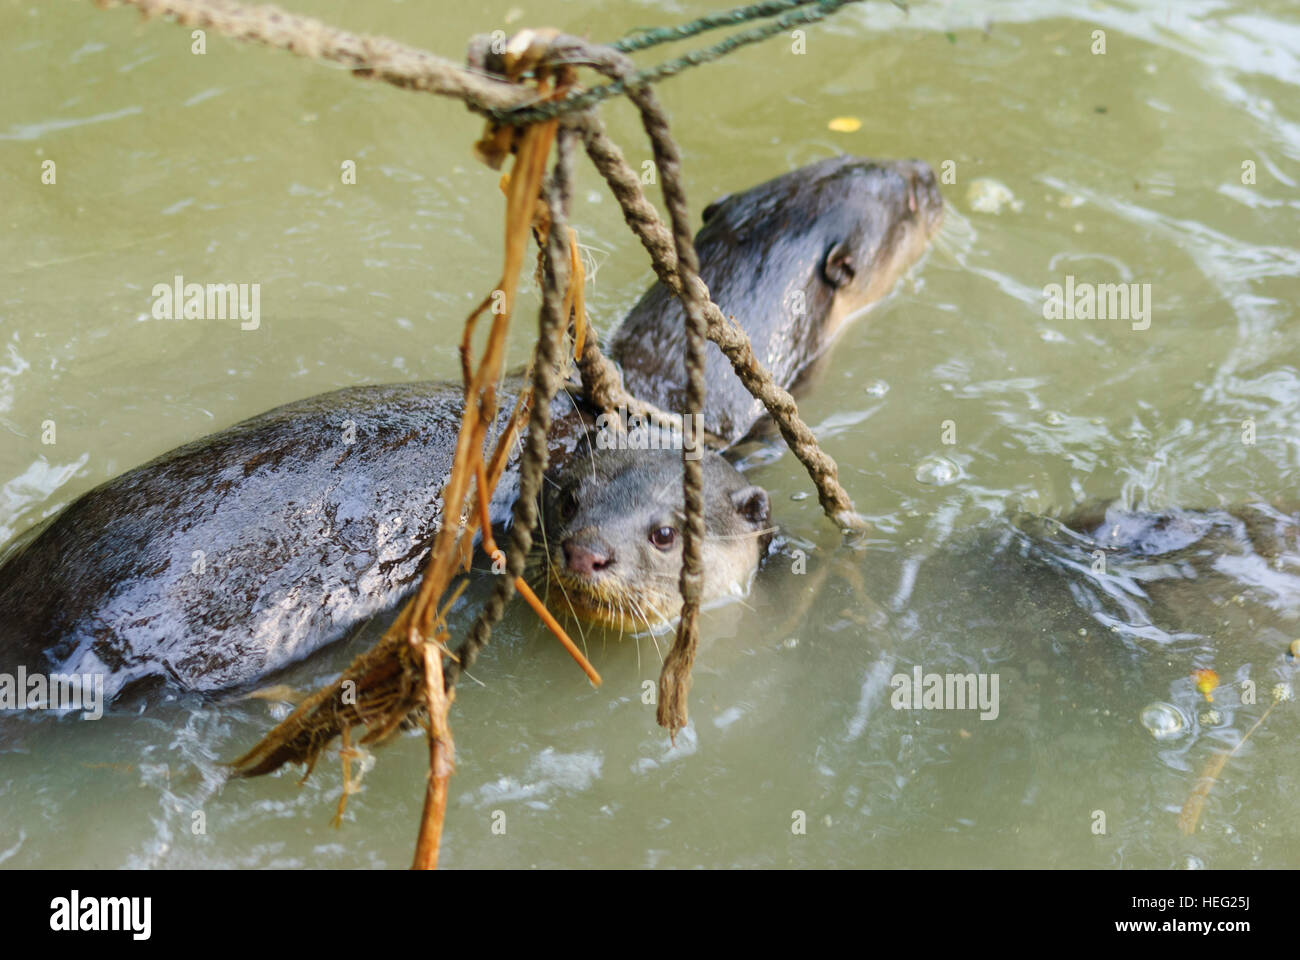 Hariargup: 2 rope-bound Indian otters or soft-fured otters (Lutrogale perspicillata), which are used by the villagers to drive fish into lowering nets Stock Photo